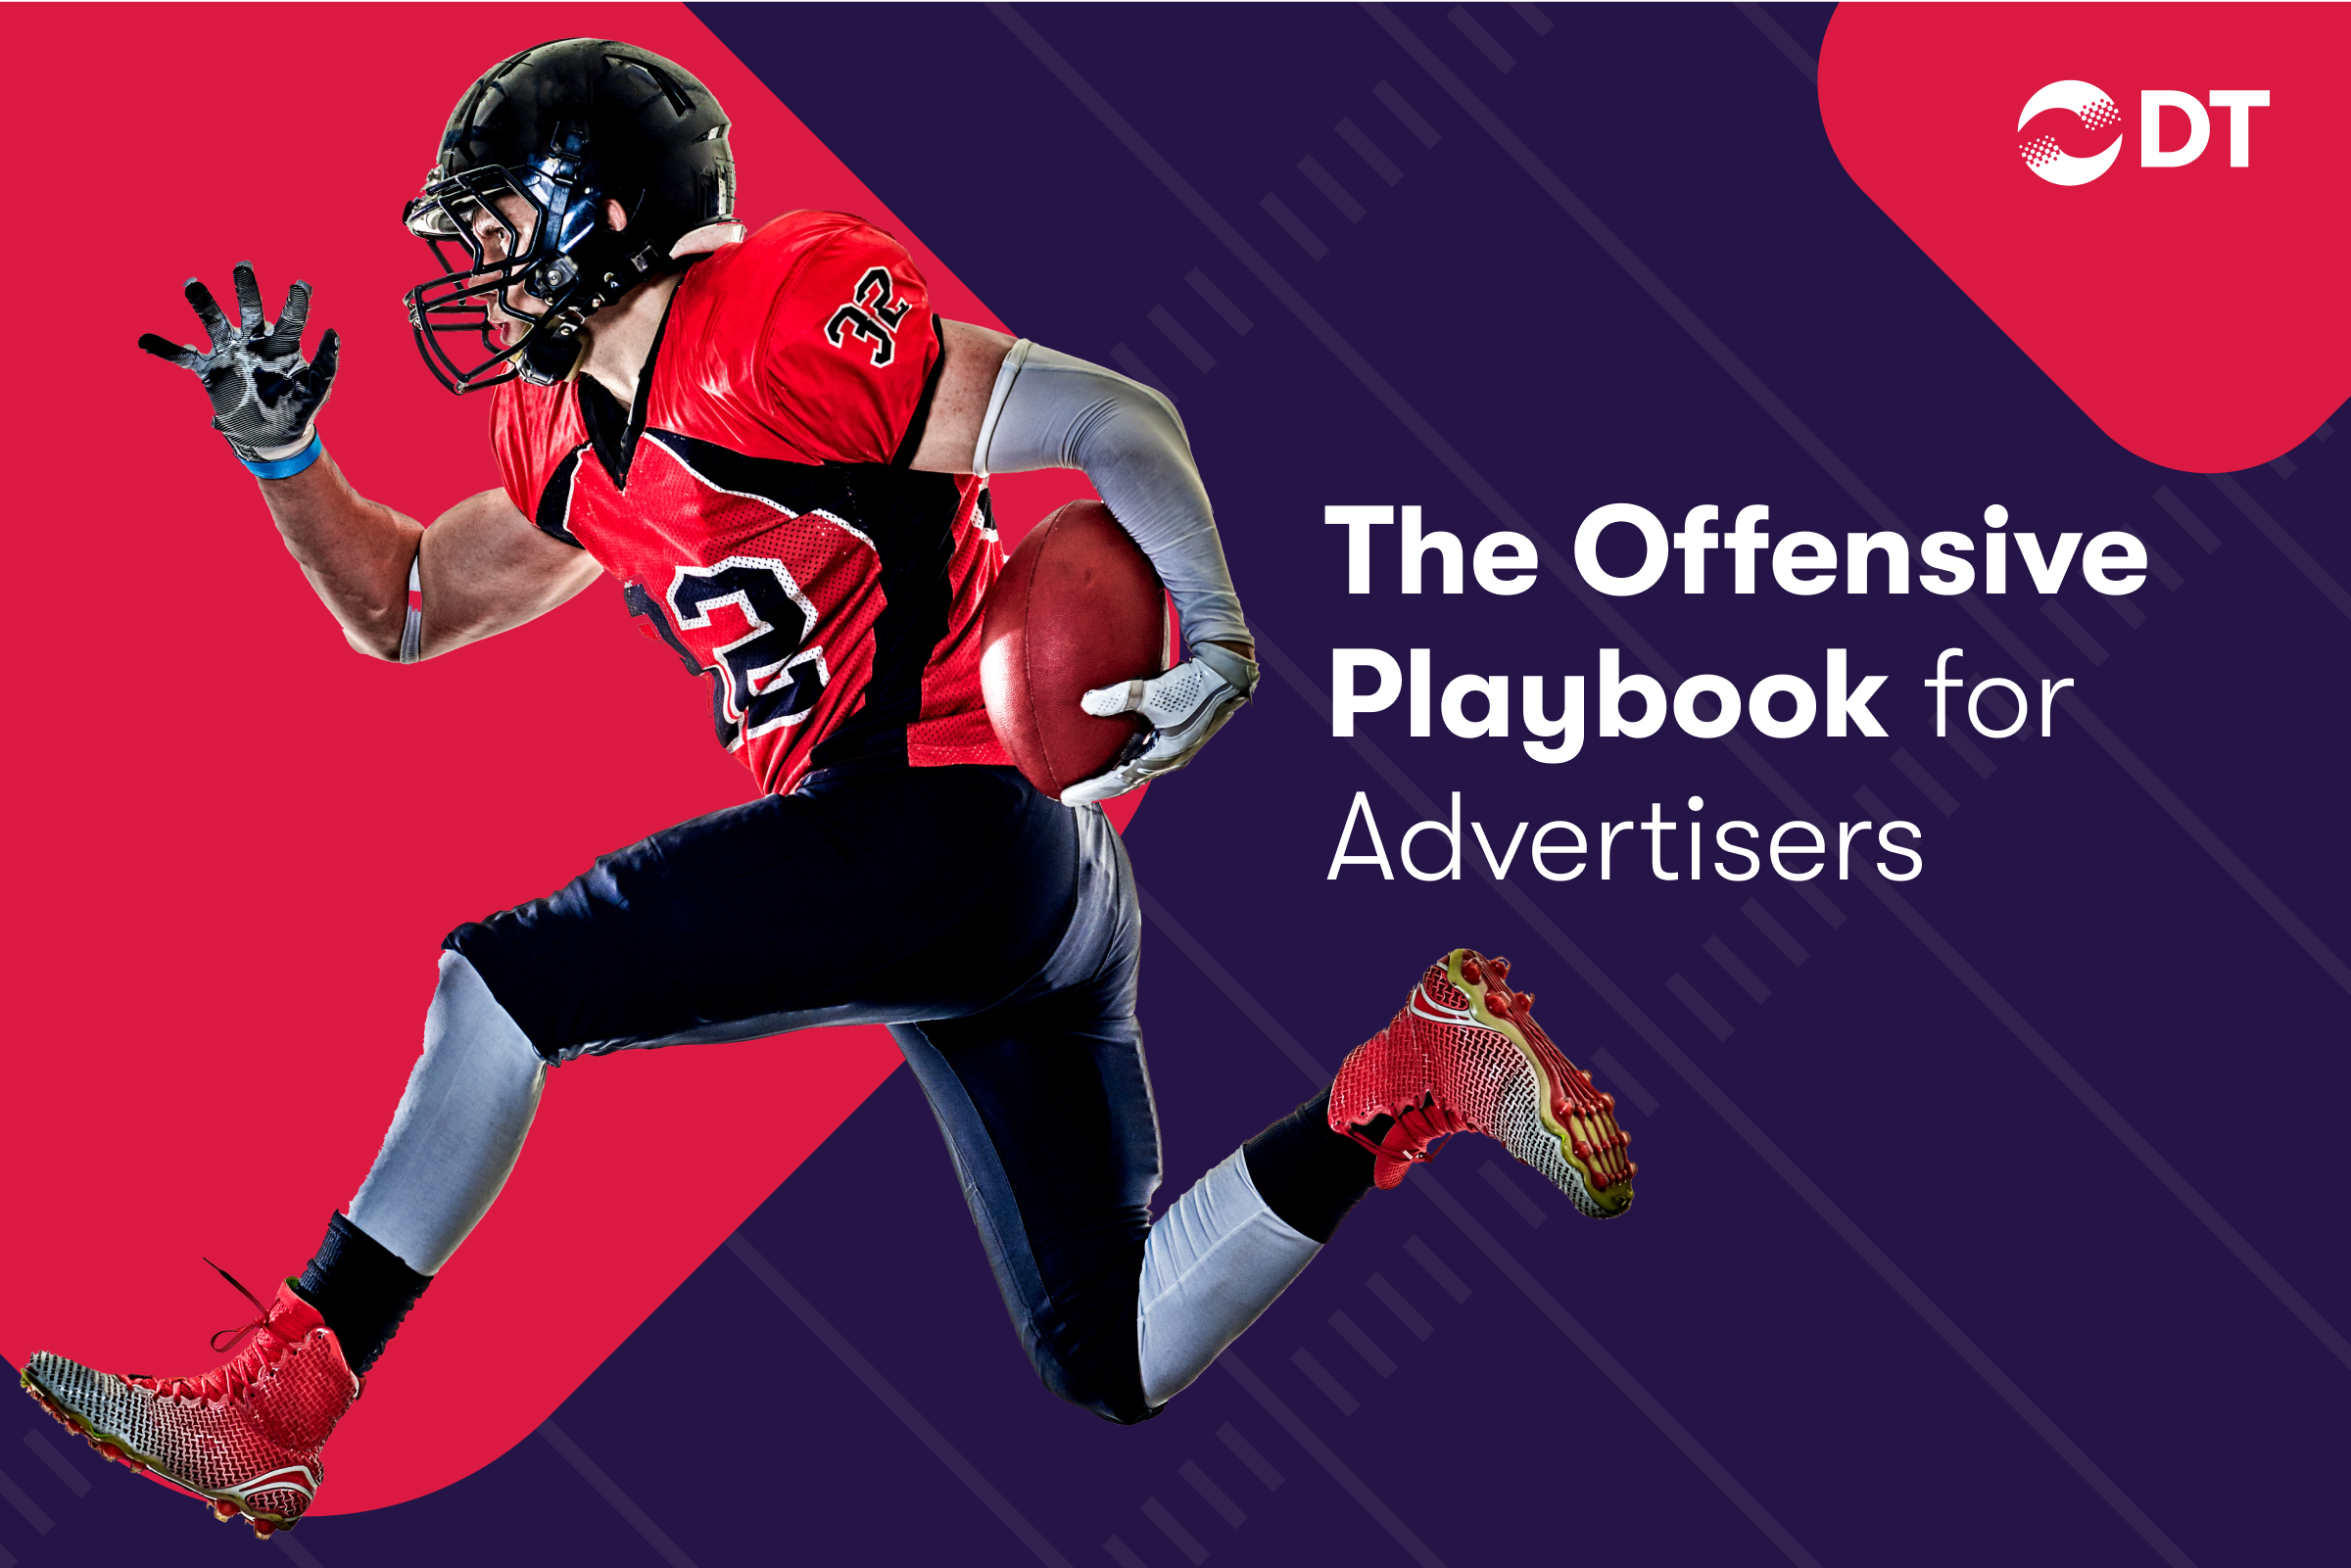 The Offensive Playbook for Advertisers